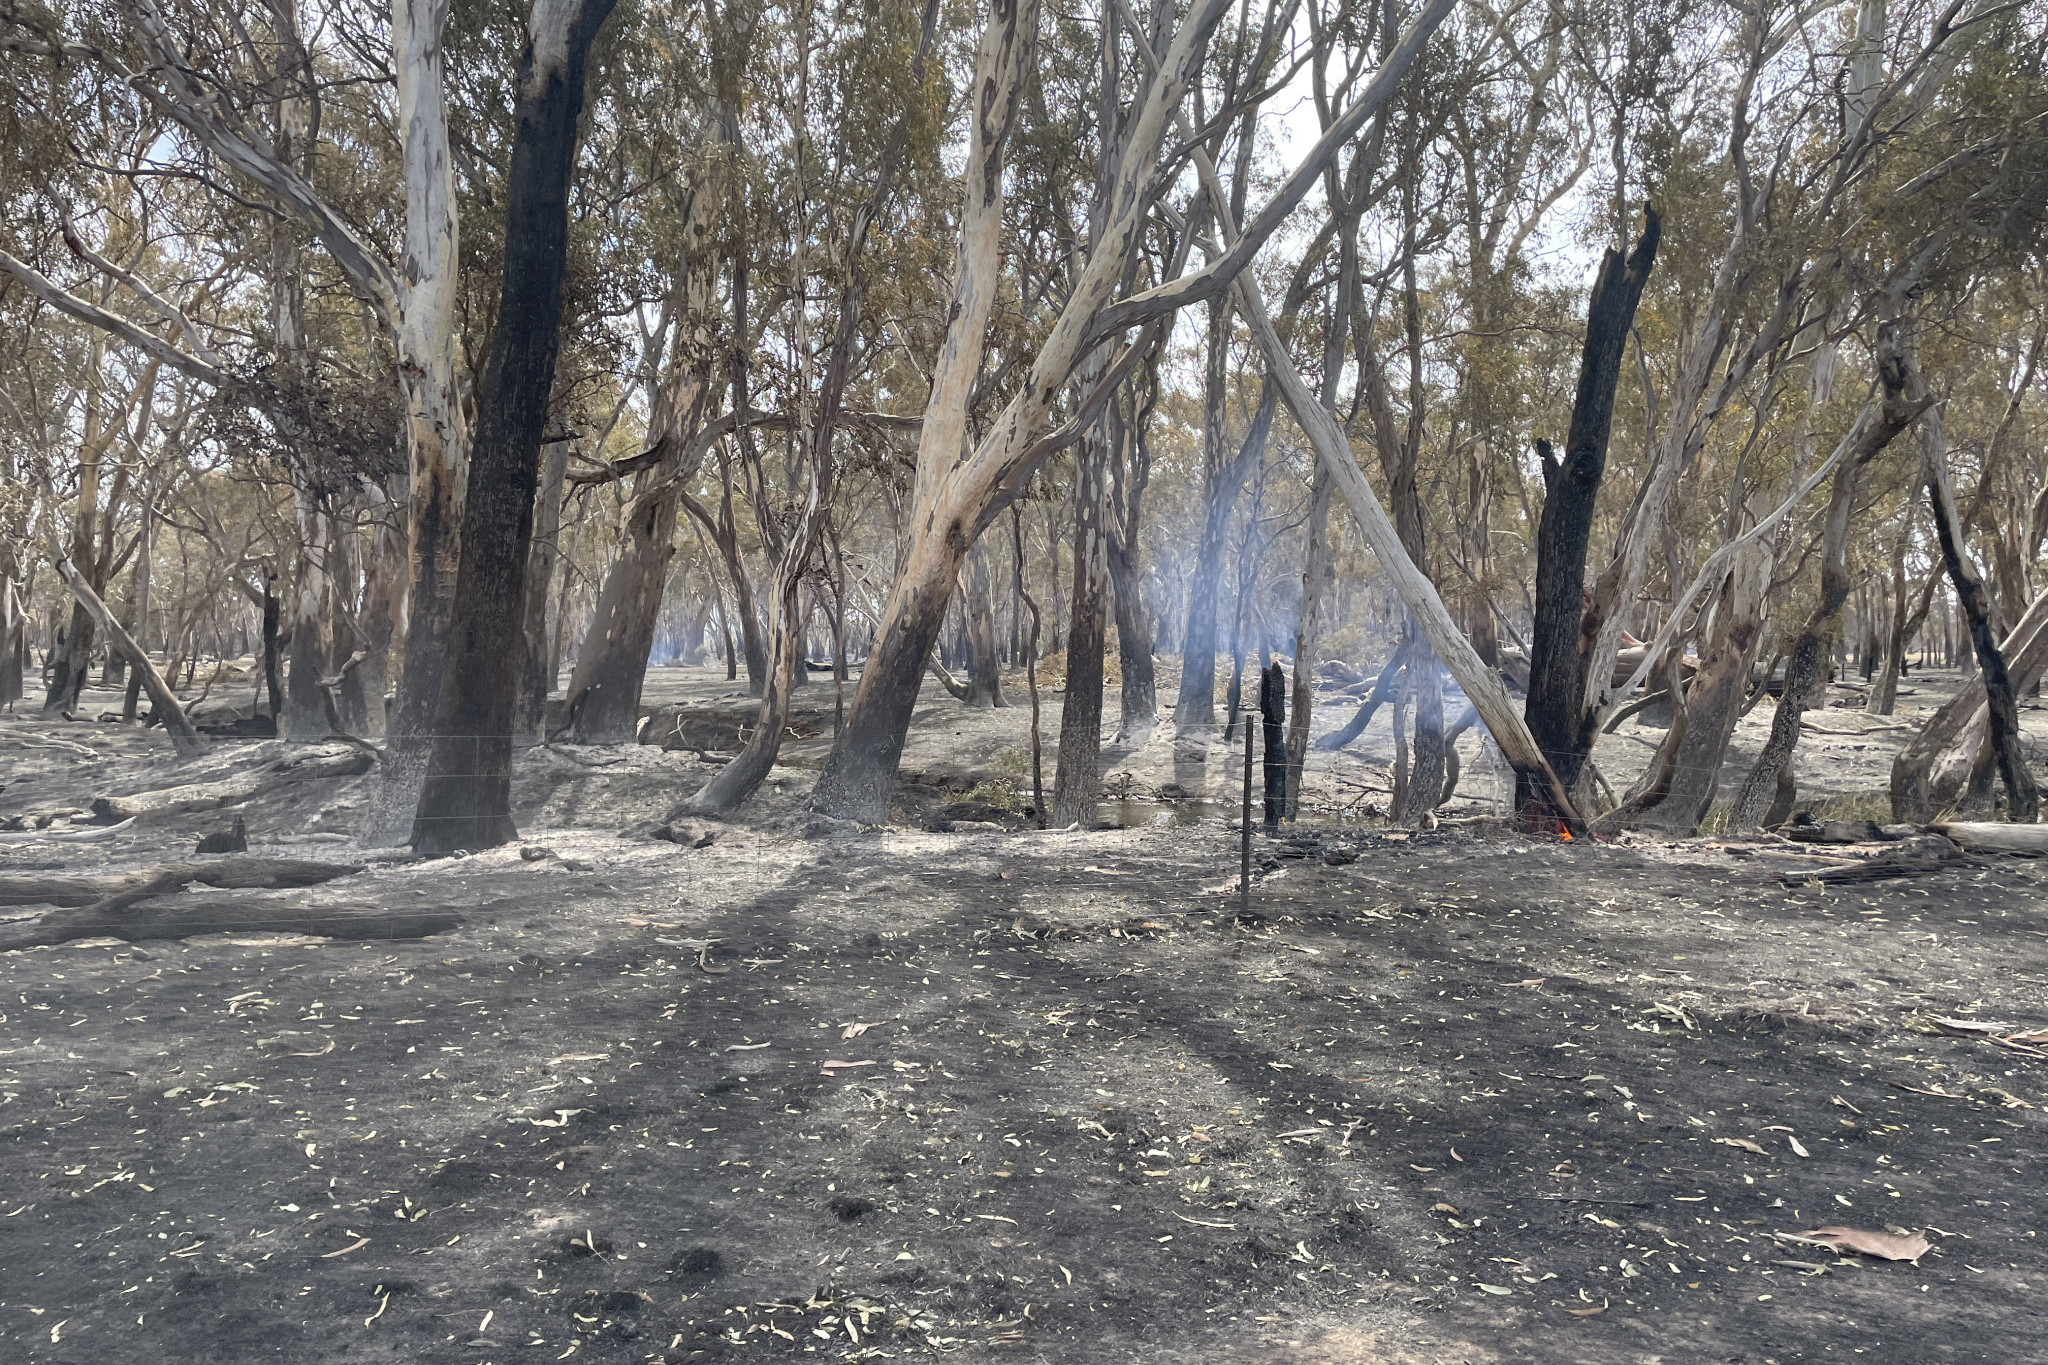 Multiple bushfires have torn through the state this year, and Easter travellers are being asked to take care when outdoors